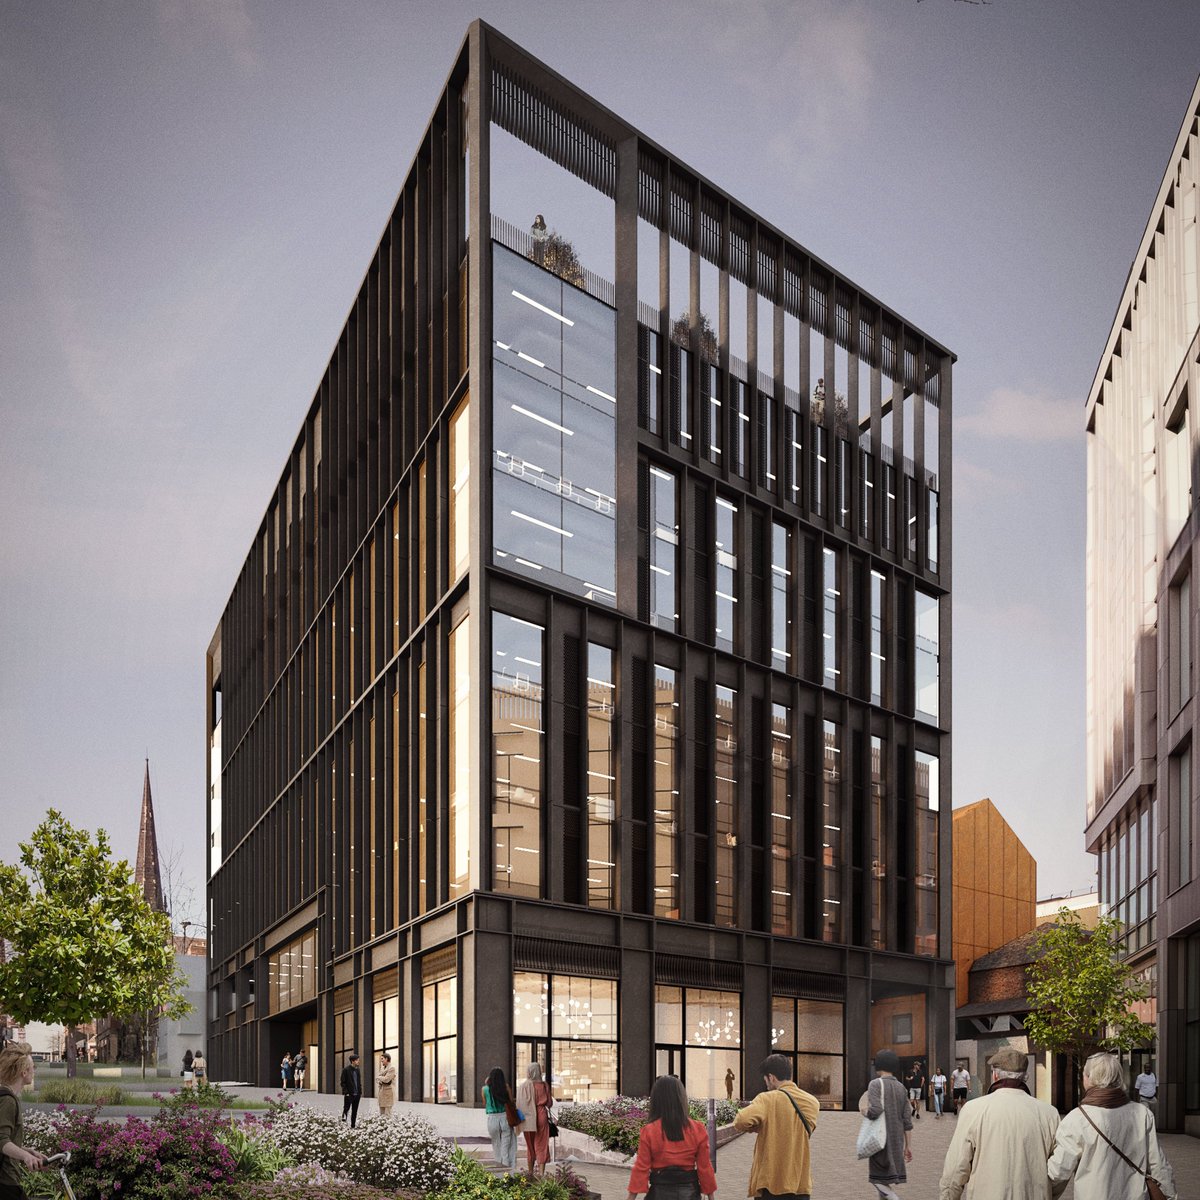 Our plans for low carbon office building Block H2 have been given the go ahead! 🎉 Looking forward to sharing more news about construction timescales in the next few weeks. @SheffCouncil @QberryRE @MontaguEvansLLP @FCBStudios #AtTheHeartOfItAll #SheffieldisSuper